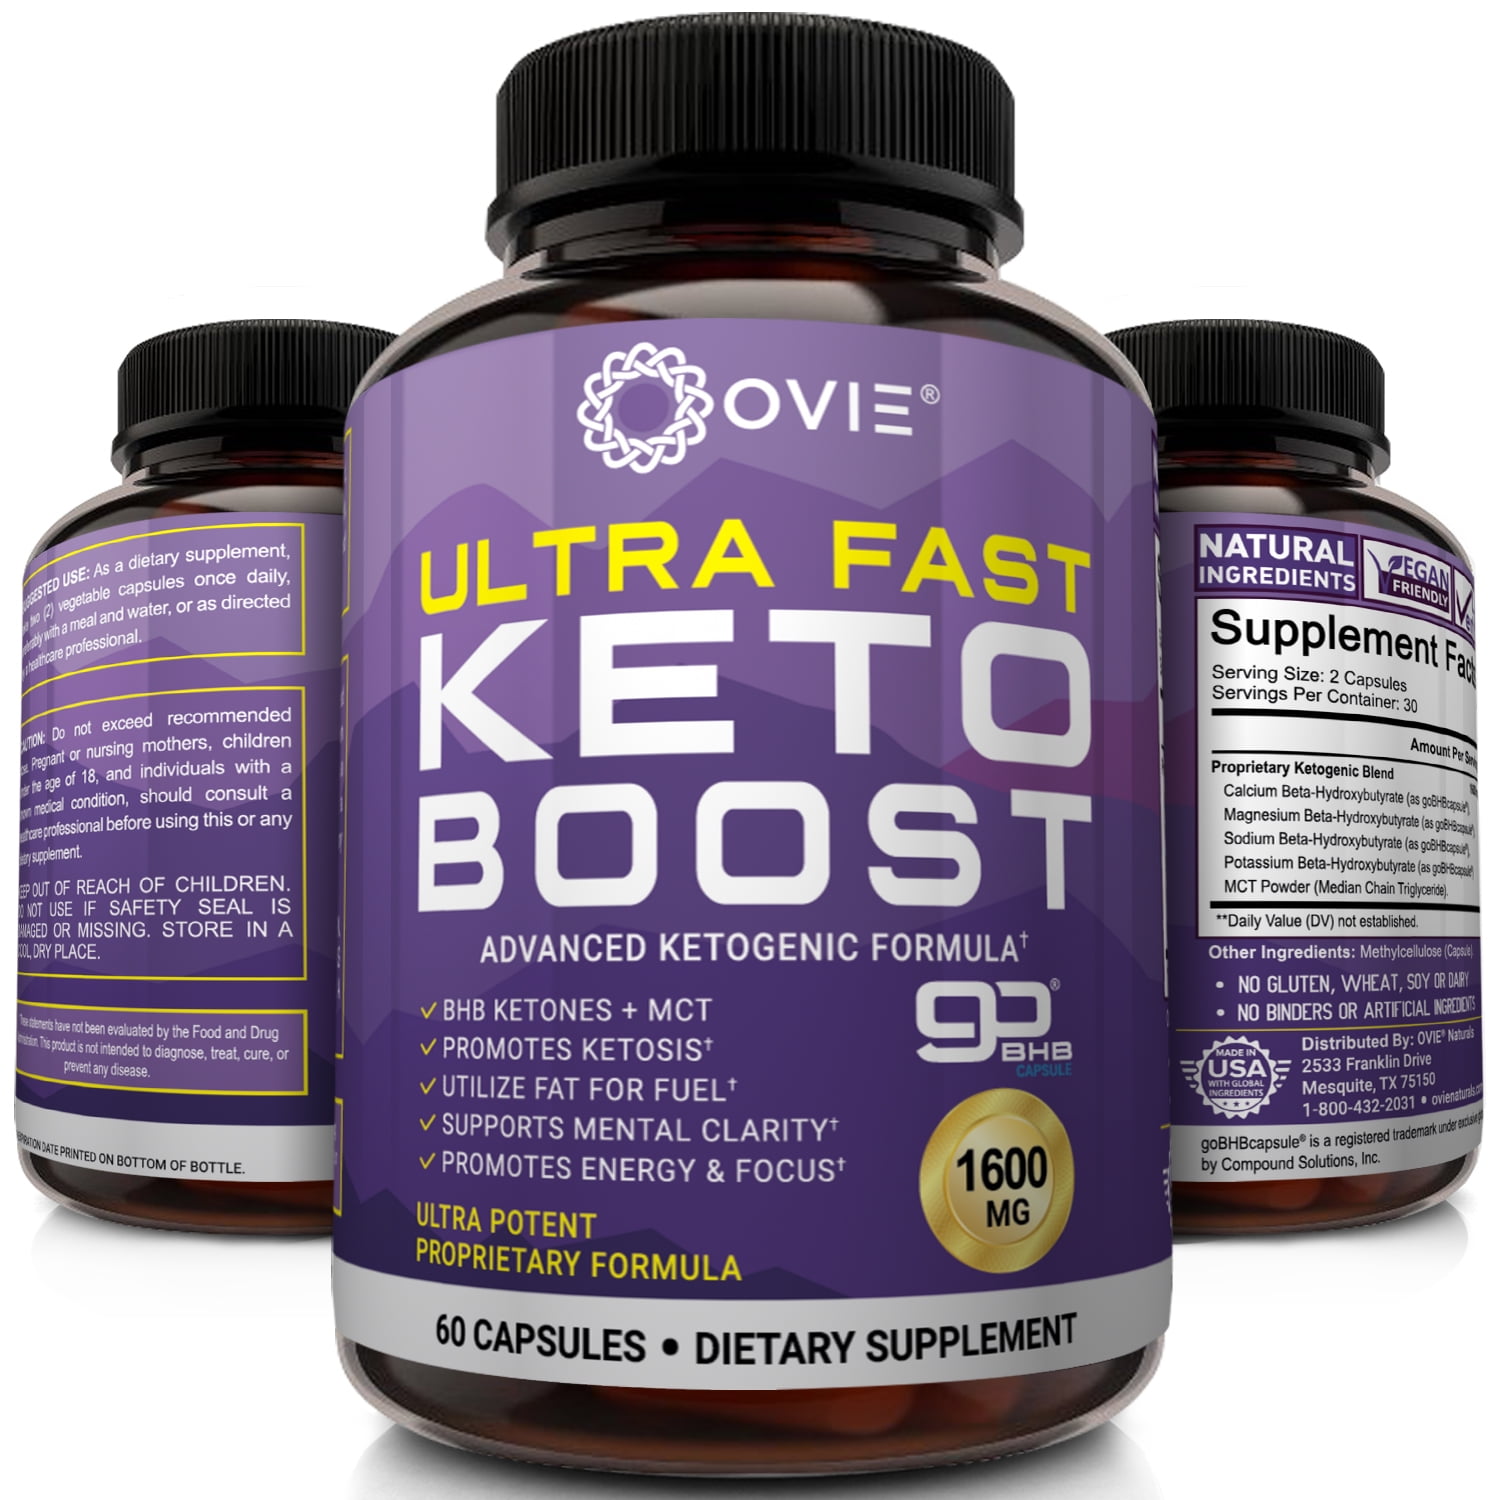 Ultra Fast Pure Keto Boost 1600mg Advanced Clinically Researched Pure Bhb Salts Beta Hydroxybutyrate With Mct Oil Keto Diet Pills Best Ketosis Ketogenic Supplement 60 Capsules 30 Day Supply Walmart Com Walmart Com